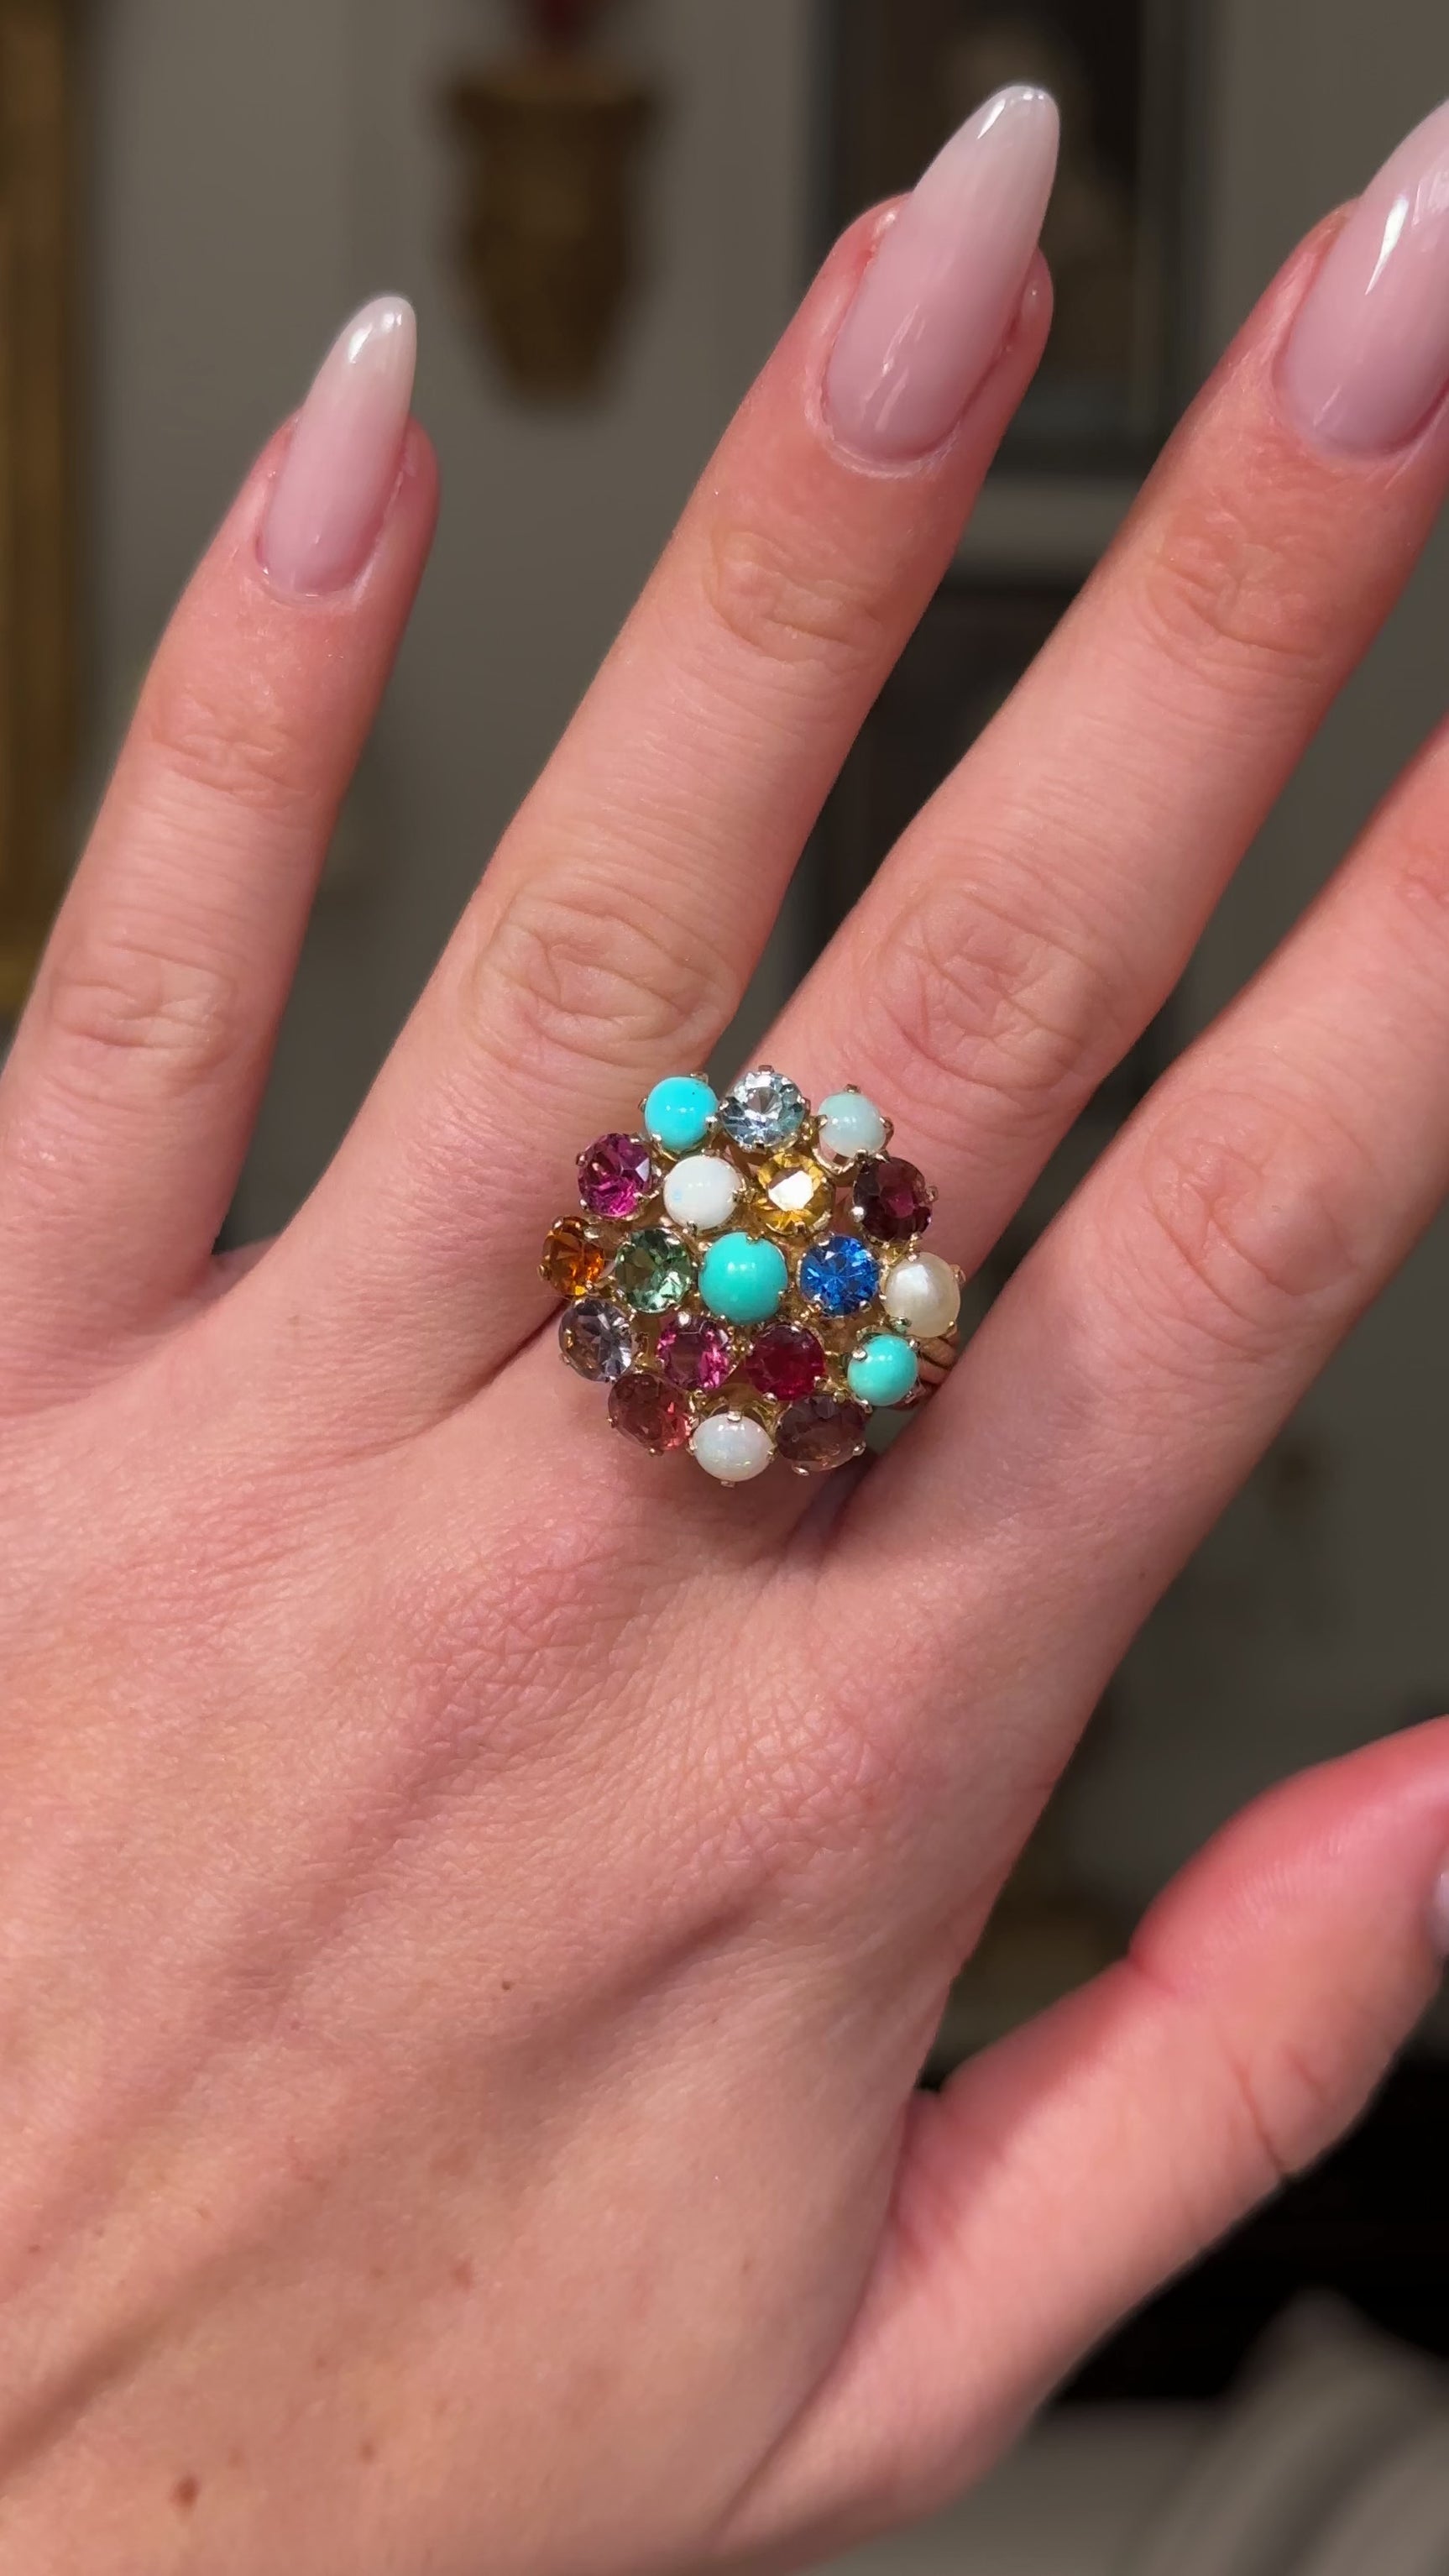 Multi gemstone cluster ring worn on hand moving  away from lens to give perspective.